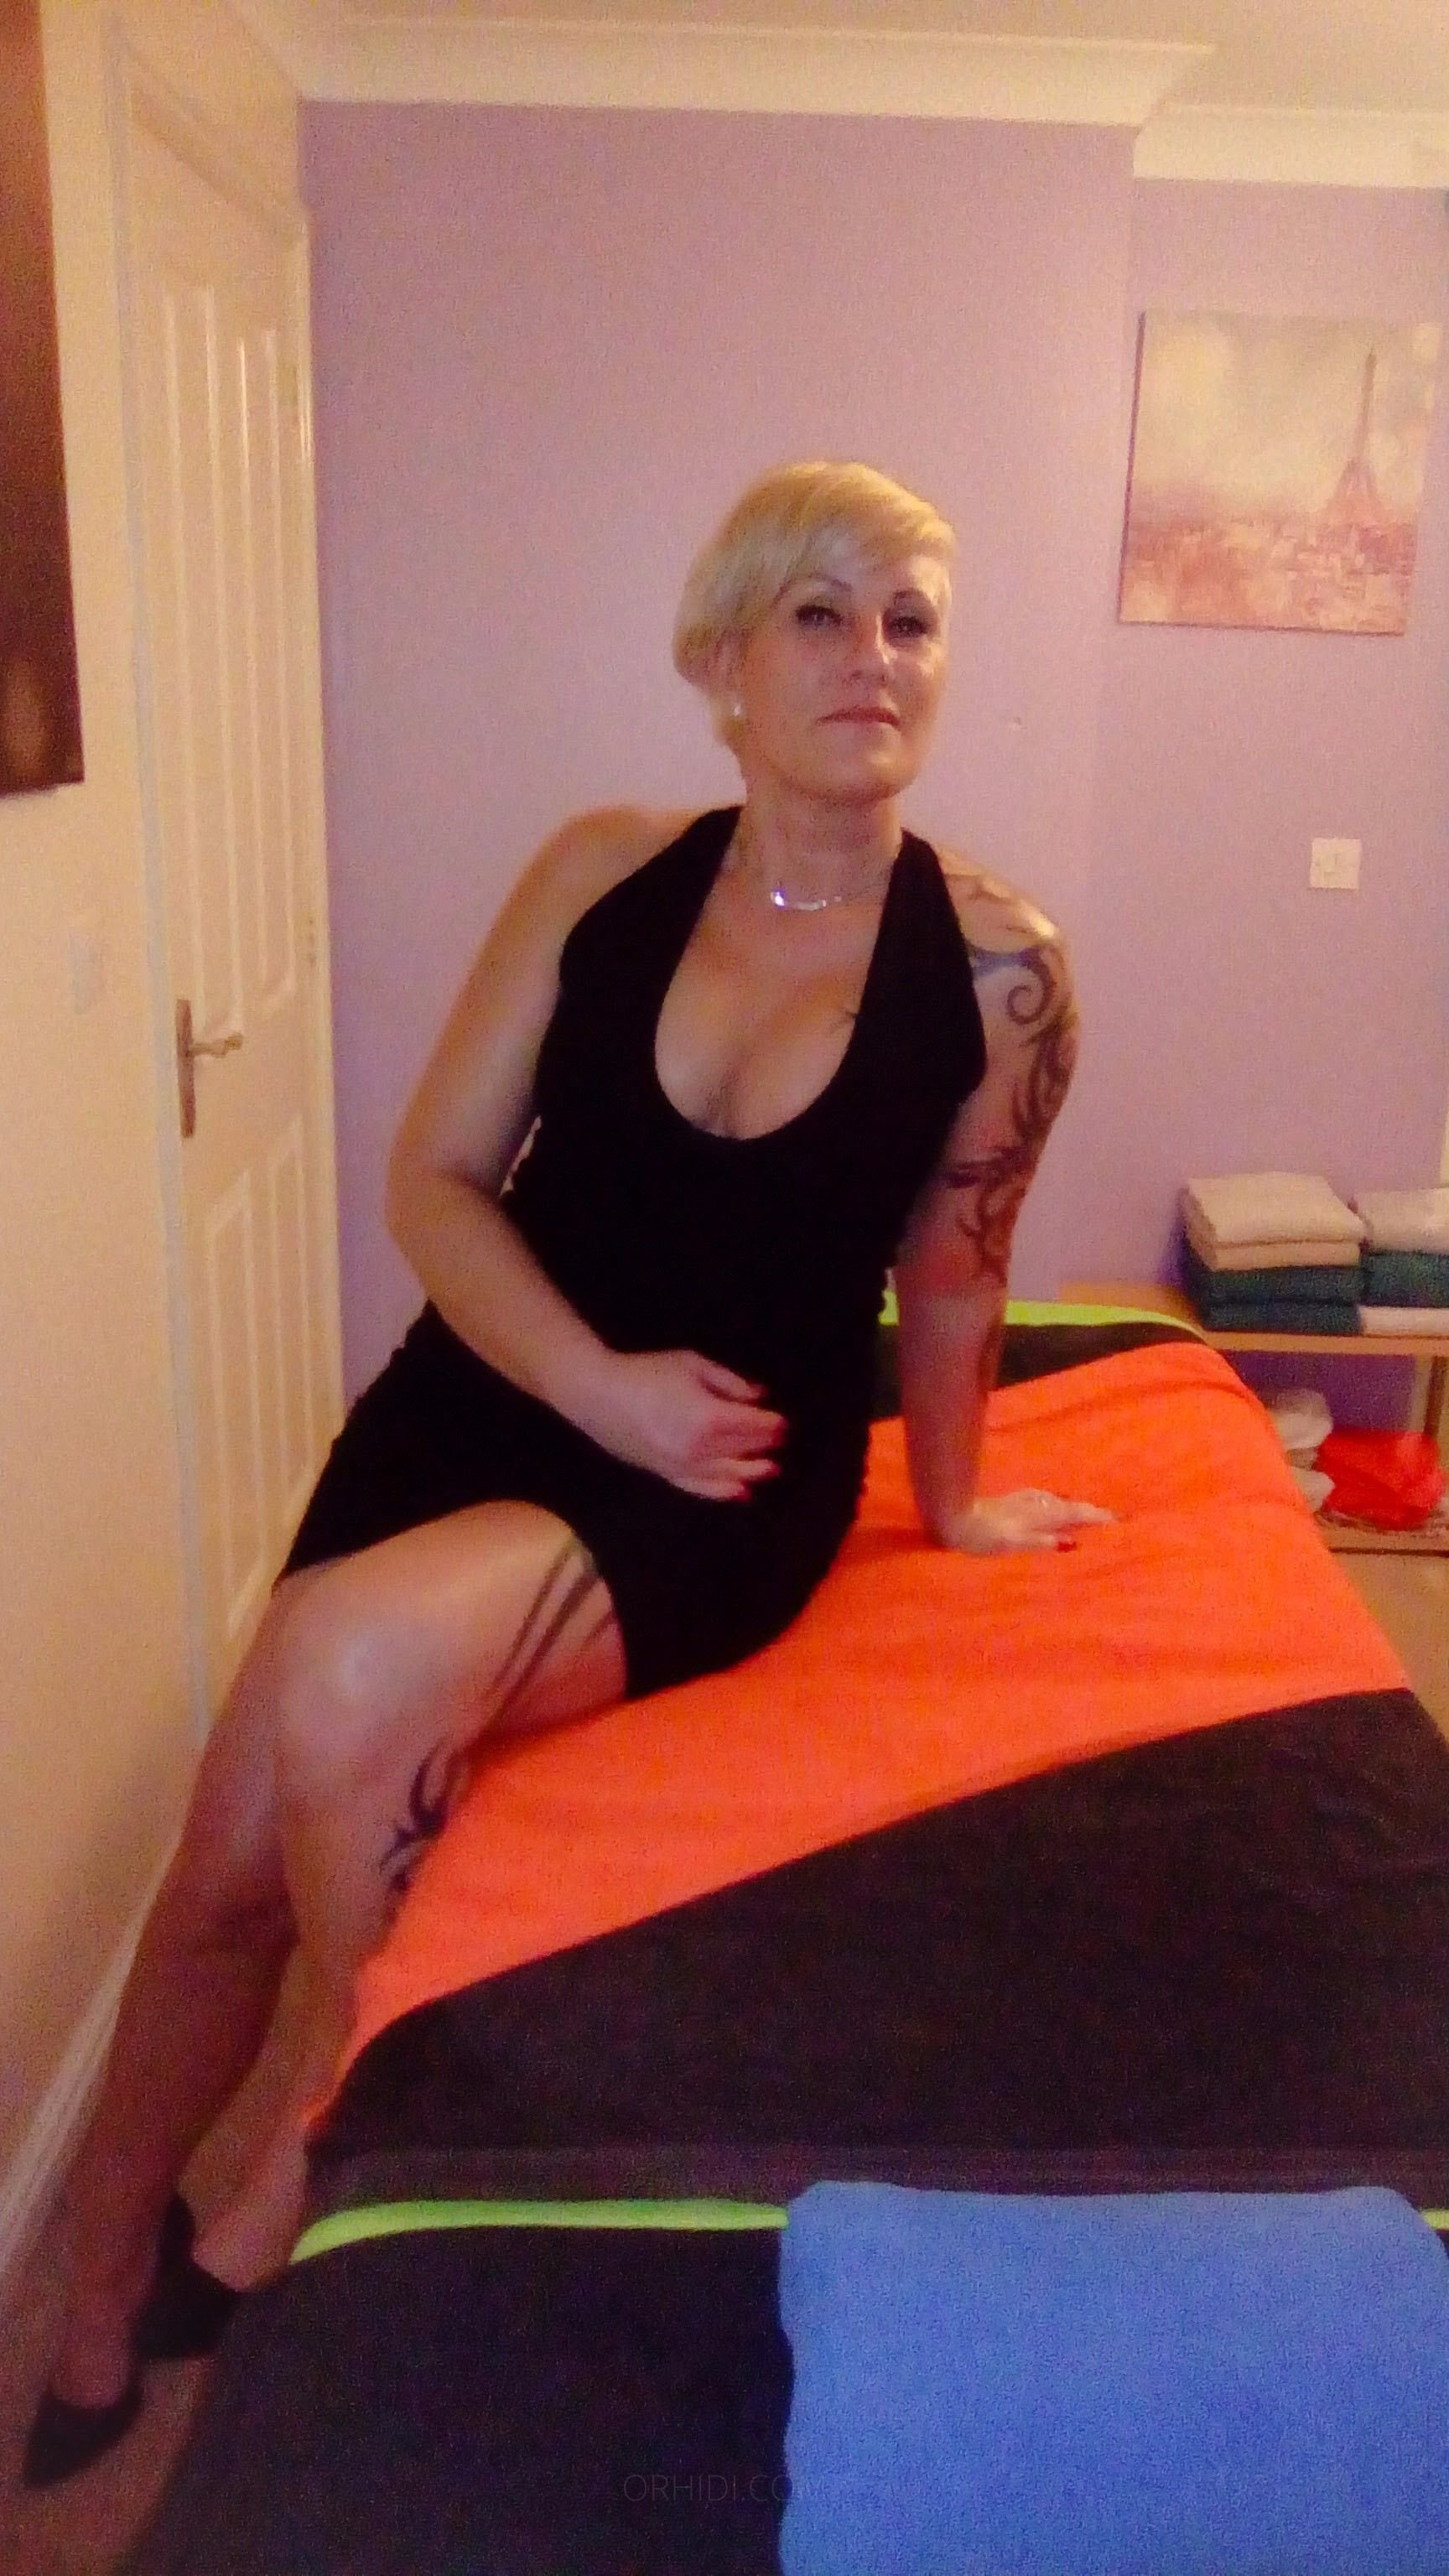 Find Escort Service in Asbach and Enjoy Time With Pretty Girls - model photo Amanda Masseuse